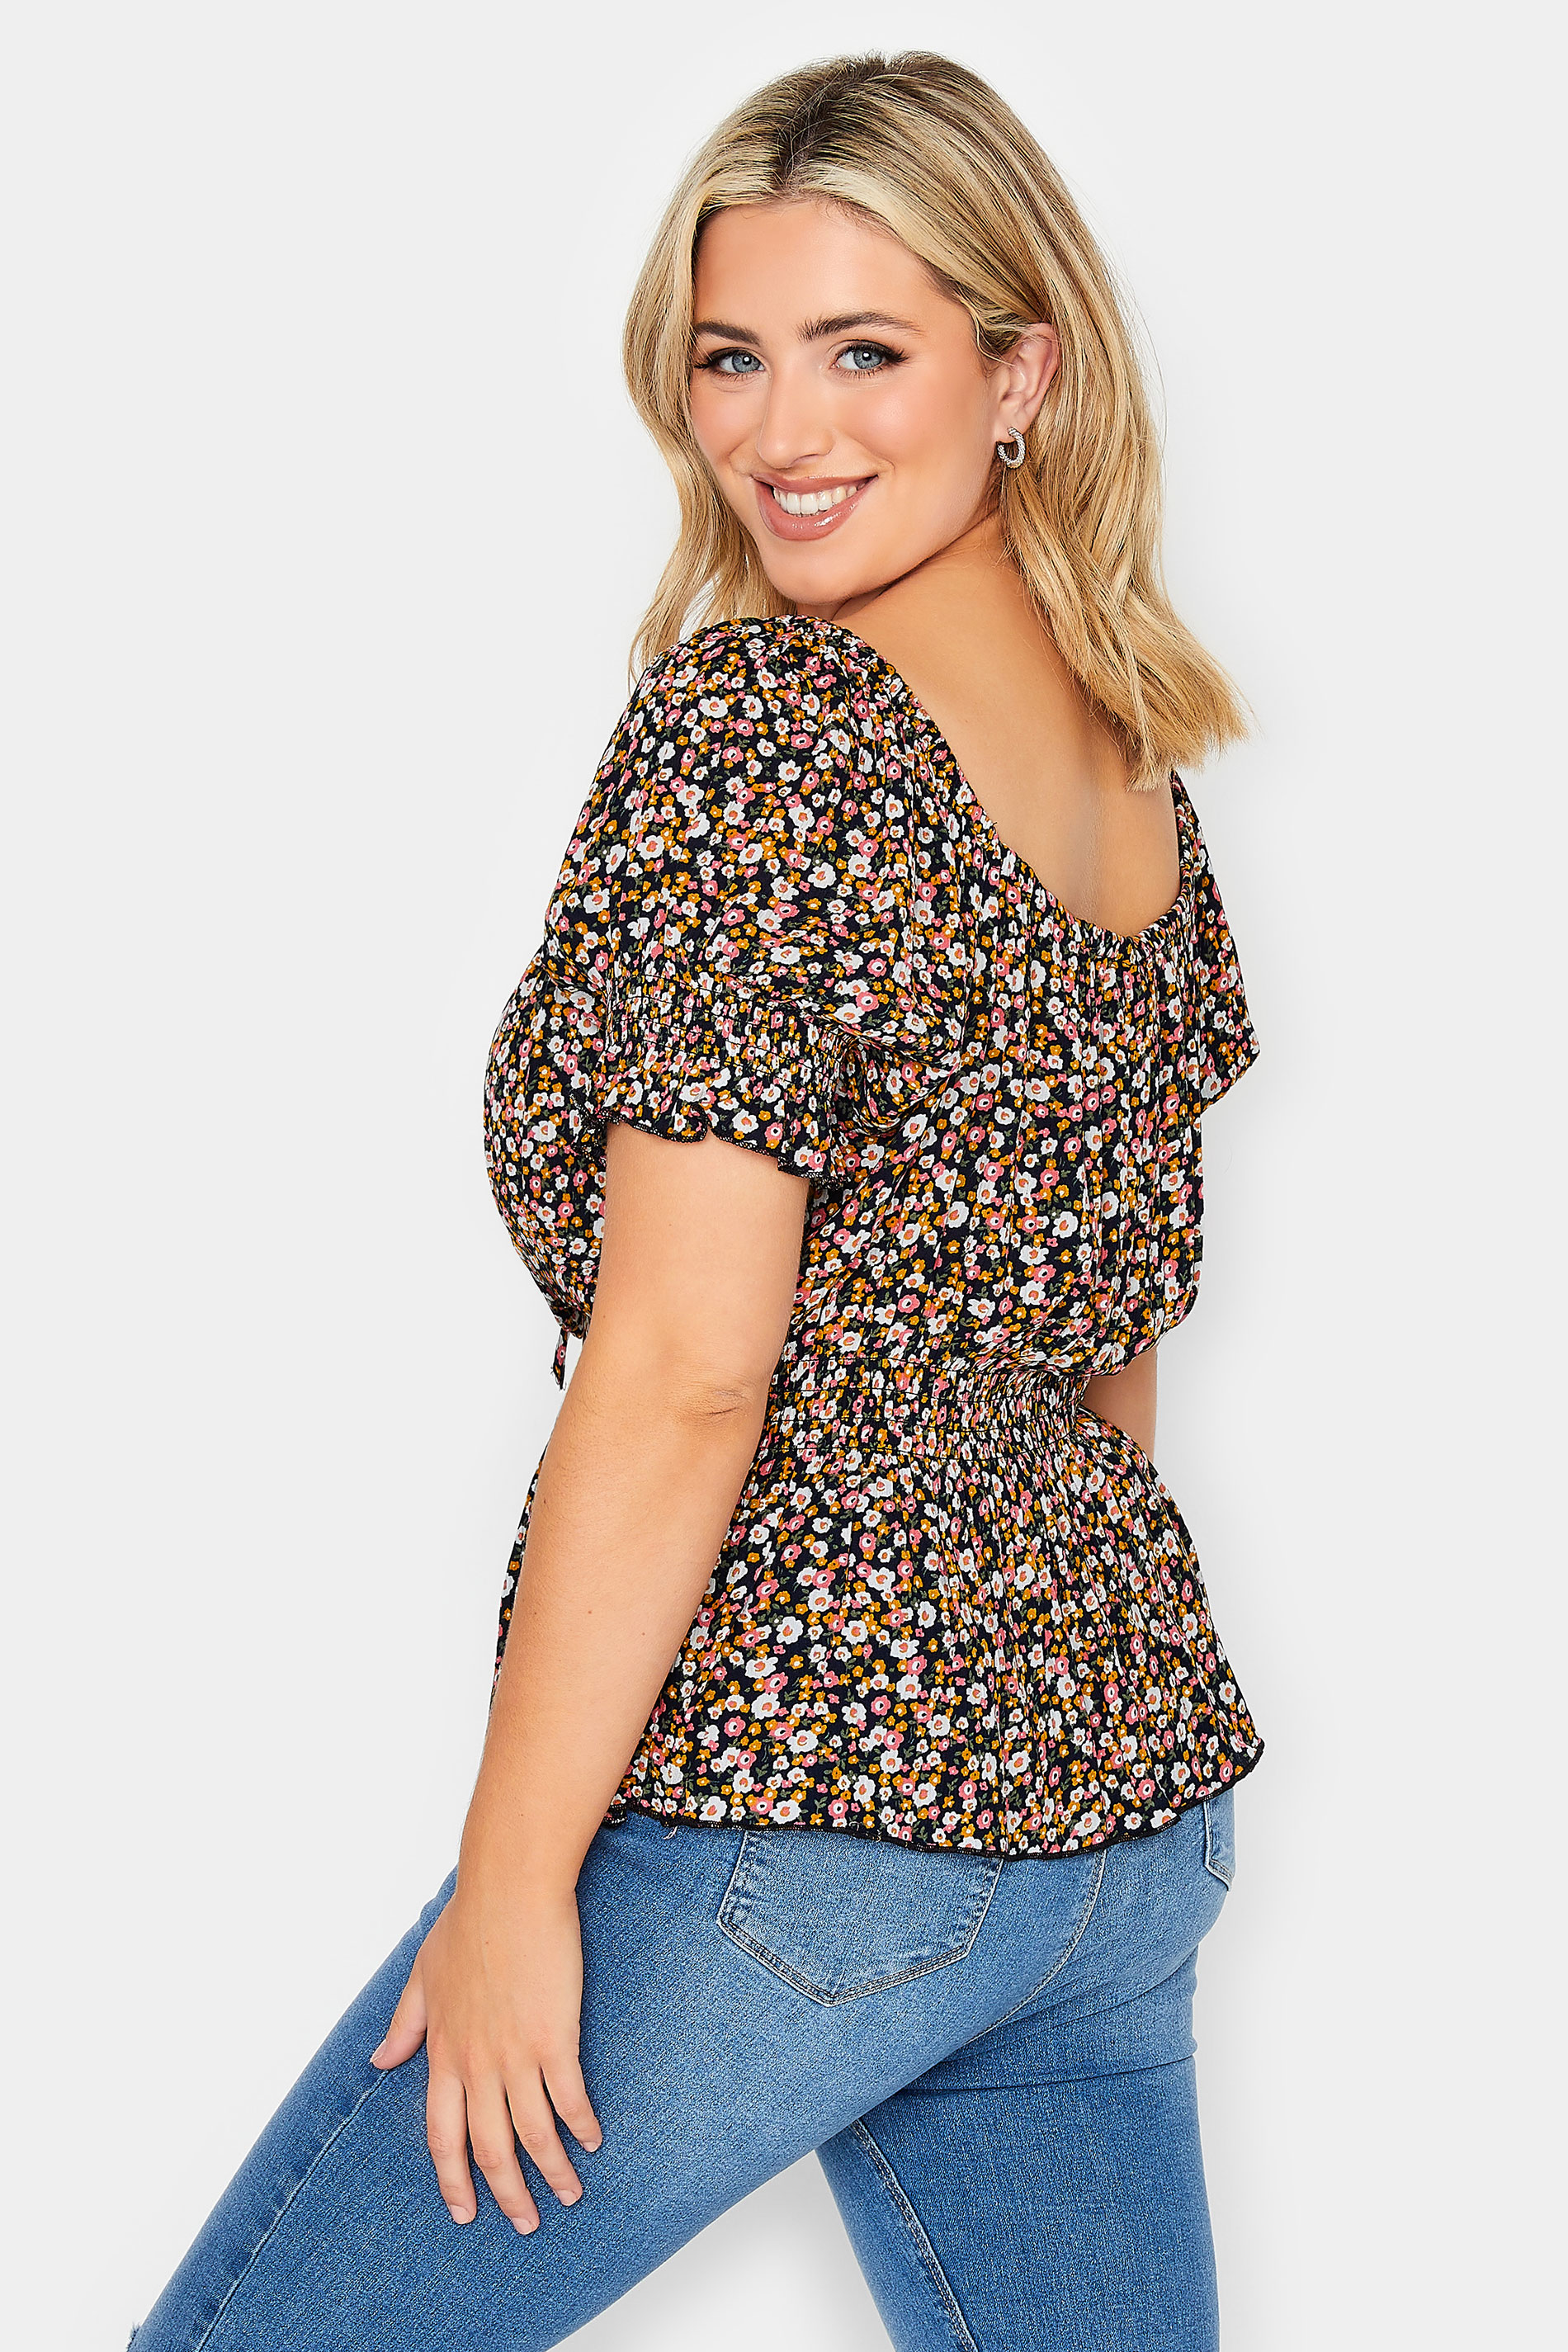 YOURS PETITE Plus Size Navy Blue Floral Bardot Top | Yours Clothing 3